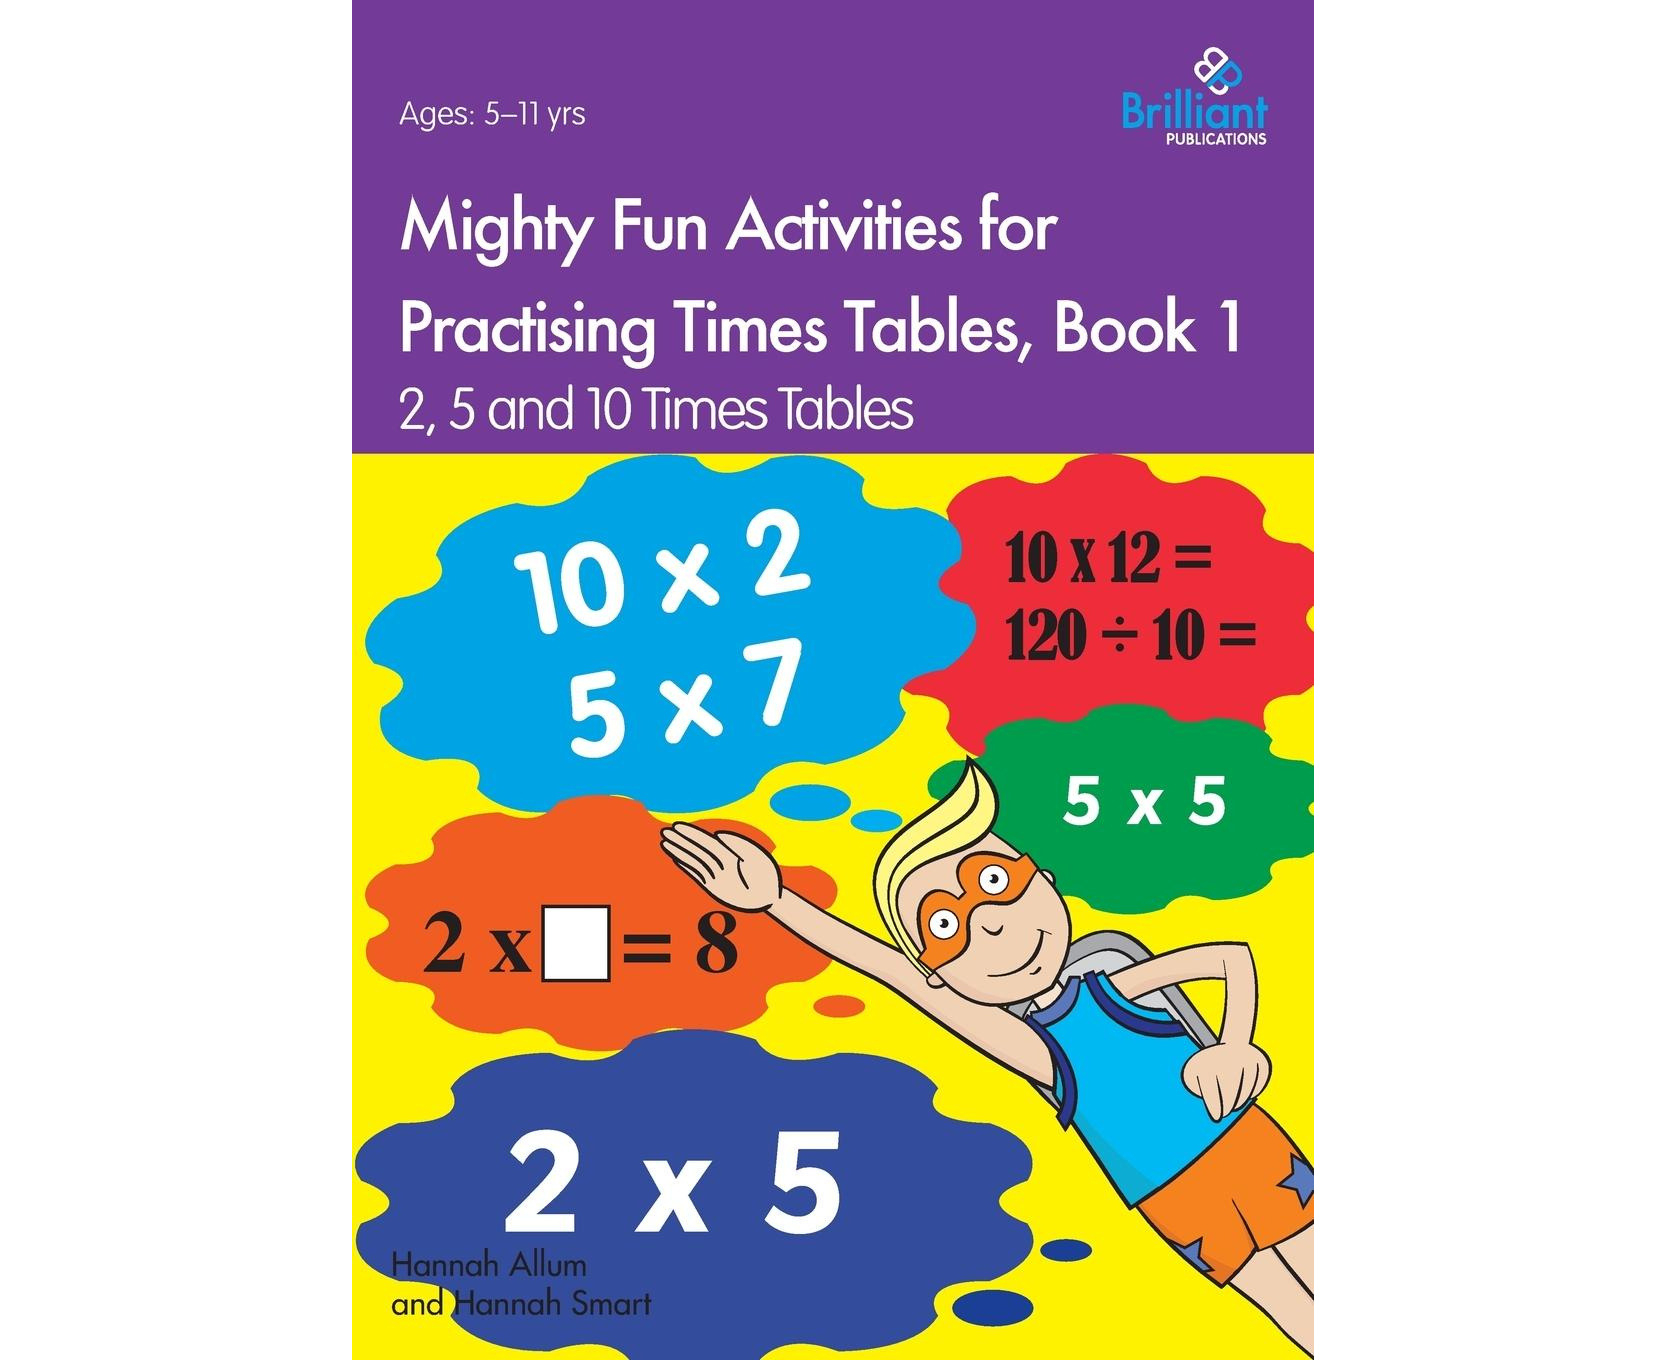 Mighty Fun Activities For Practising Times Tables 2 5 And 10 Times Tables Book 1 Au 9878